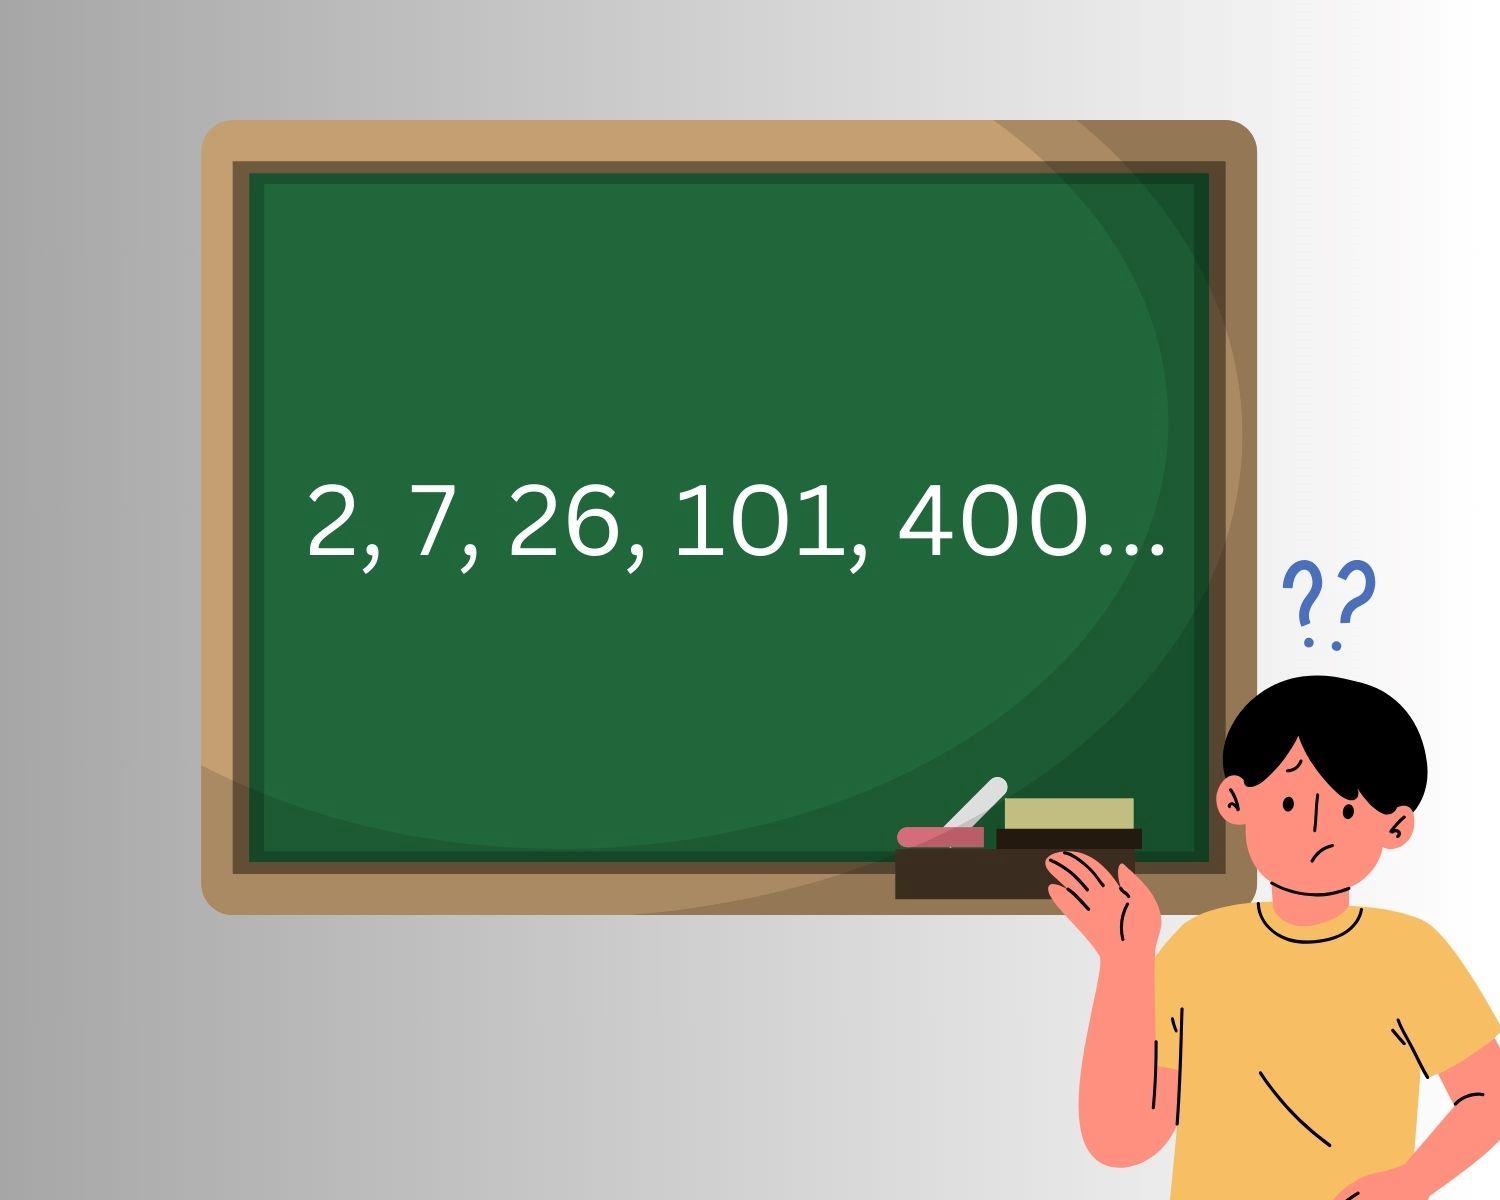 The Mind-Boggling Number Sequence You Won't Believe: 2, 7, 26, 101, 400... What Comes Next?